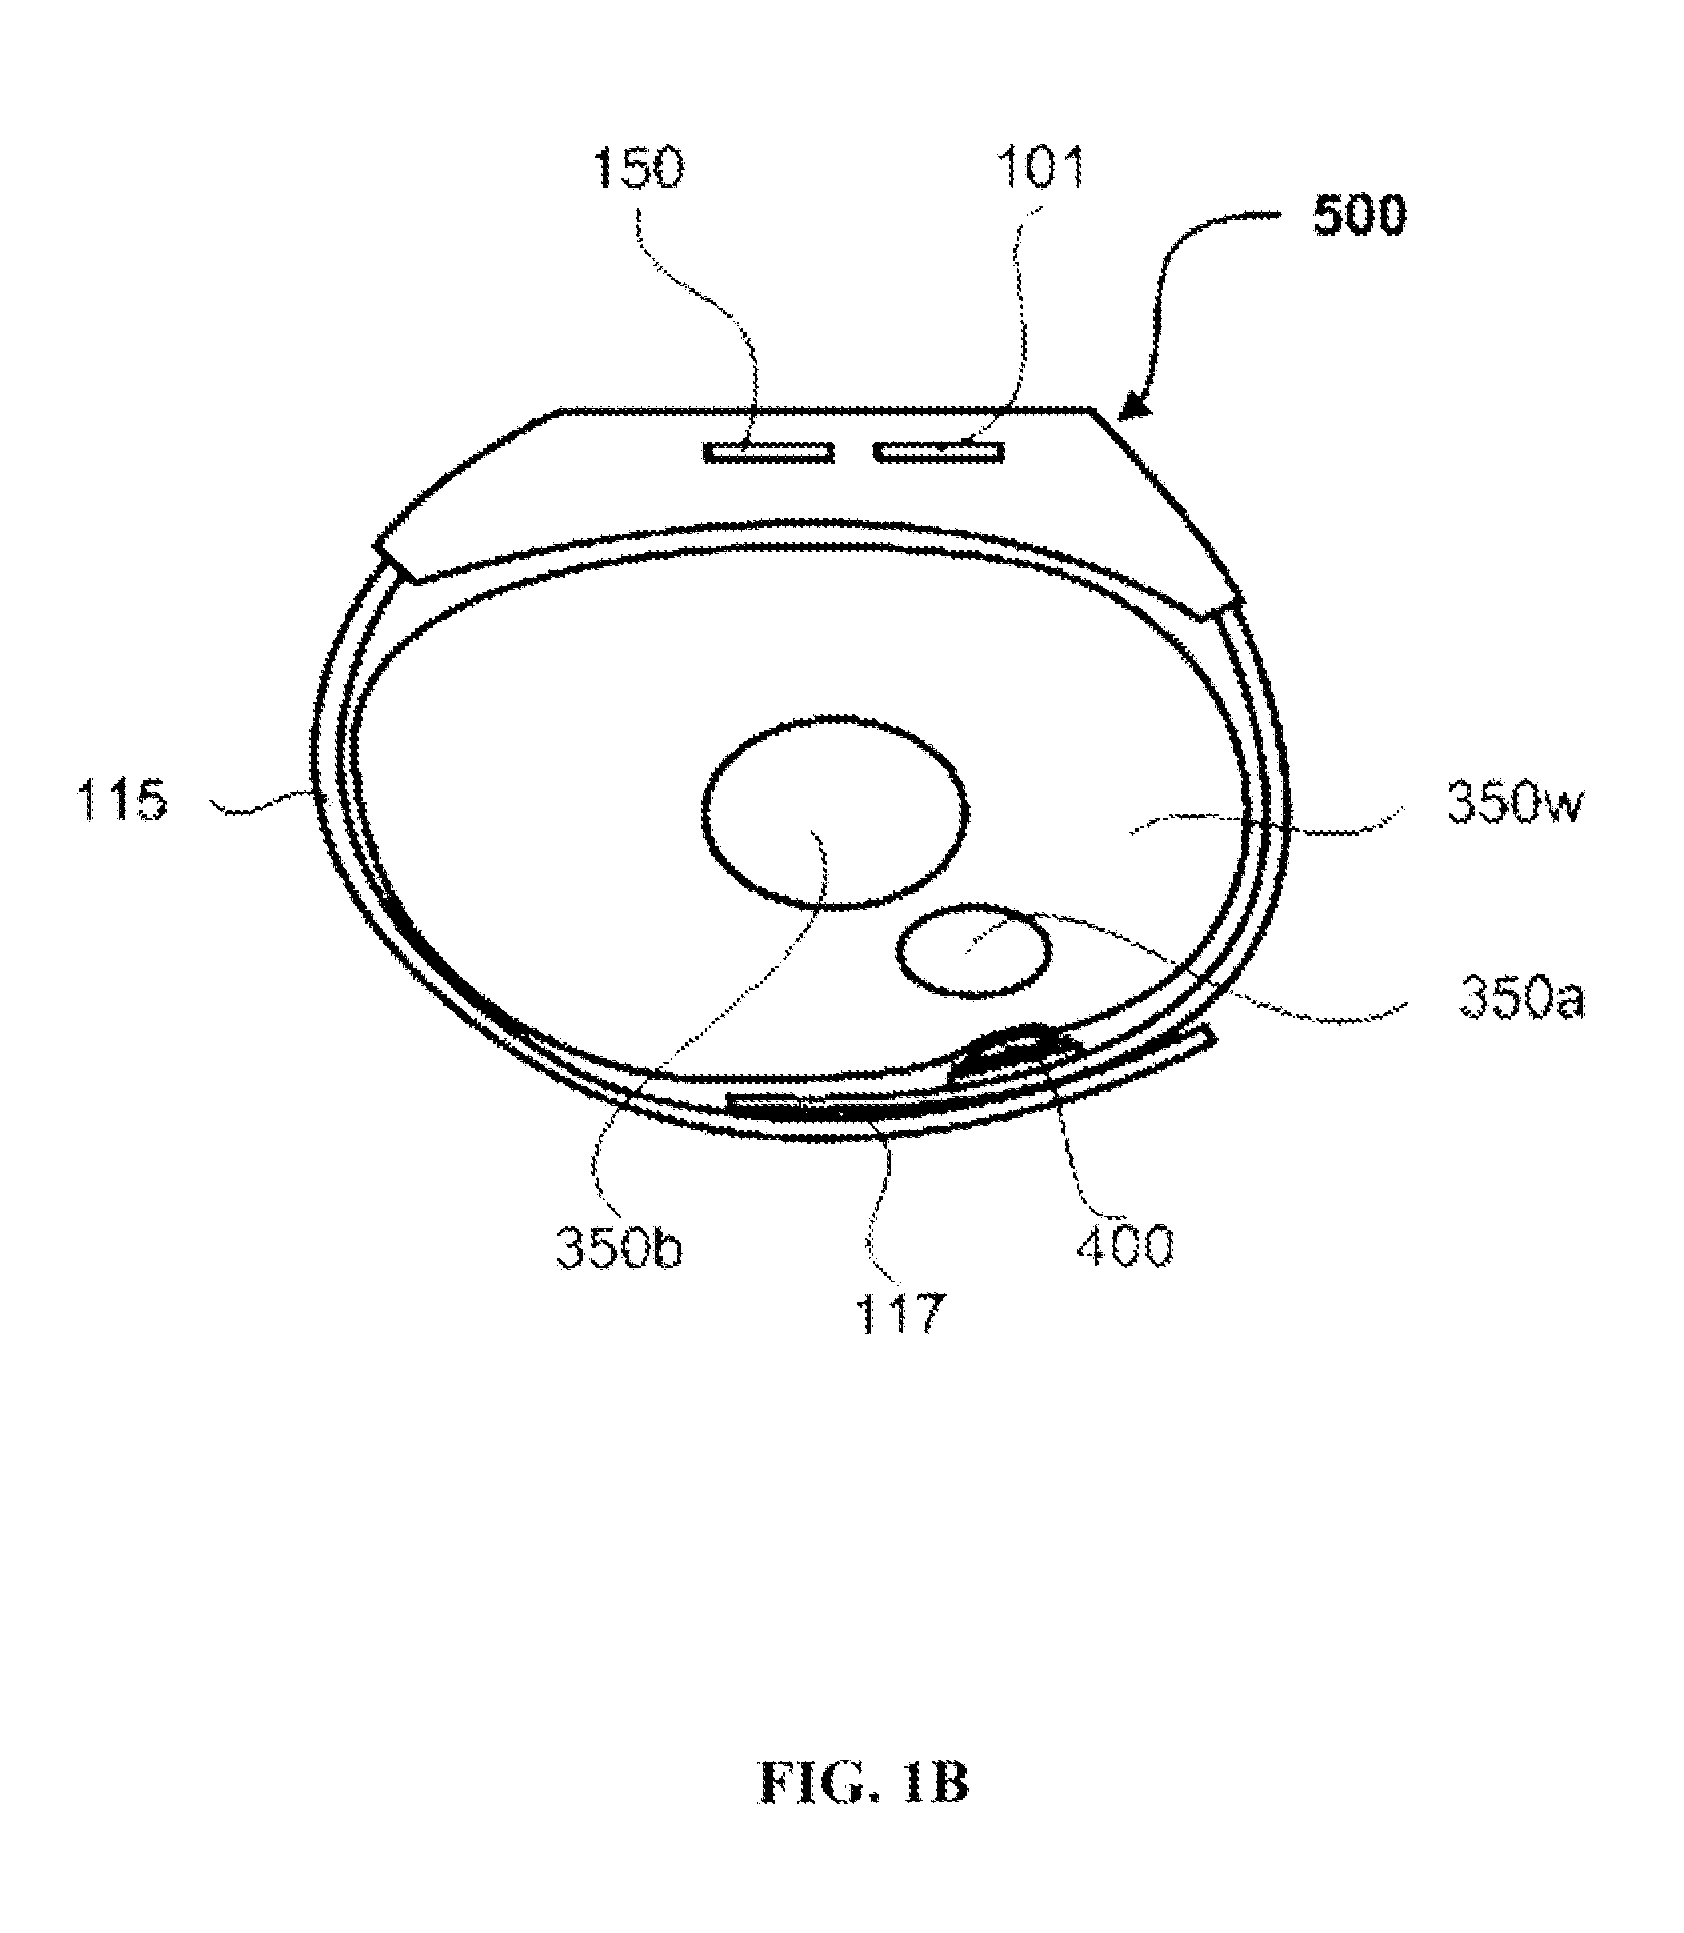 Apparatus and method for sensing radial arterial pulses for noninvasive and continuous measurement of blood pressure and arterial elasticity